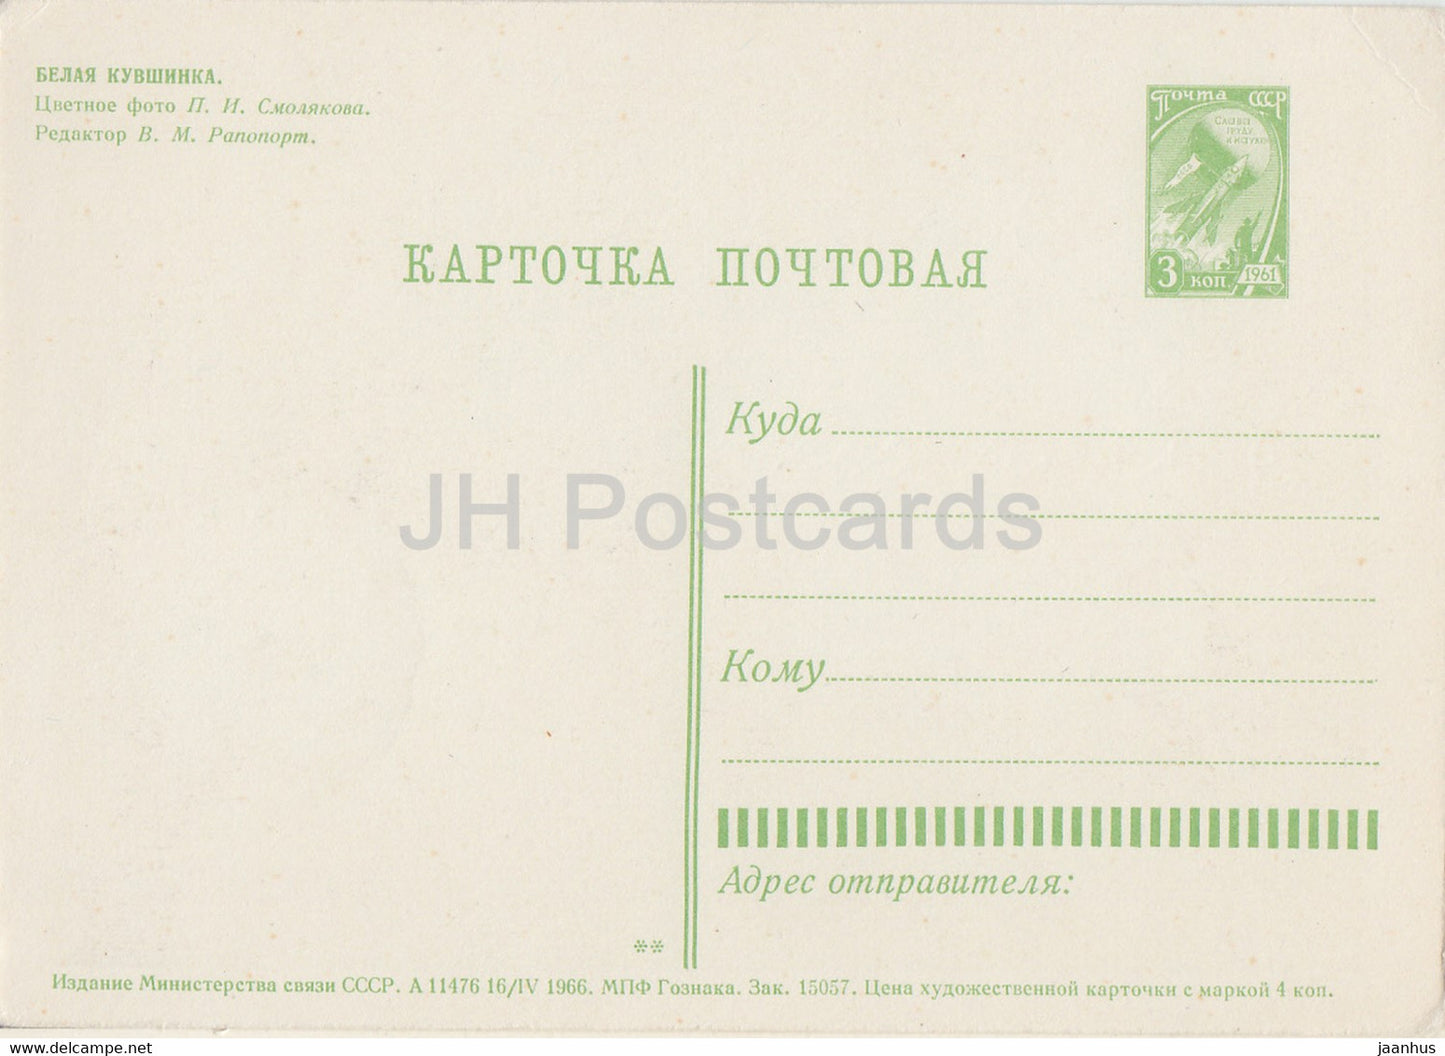 Water Lily - plants - postal stationery - 1966 - Russia USSR - unused